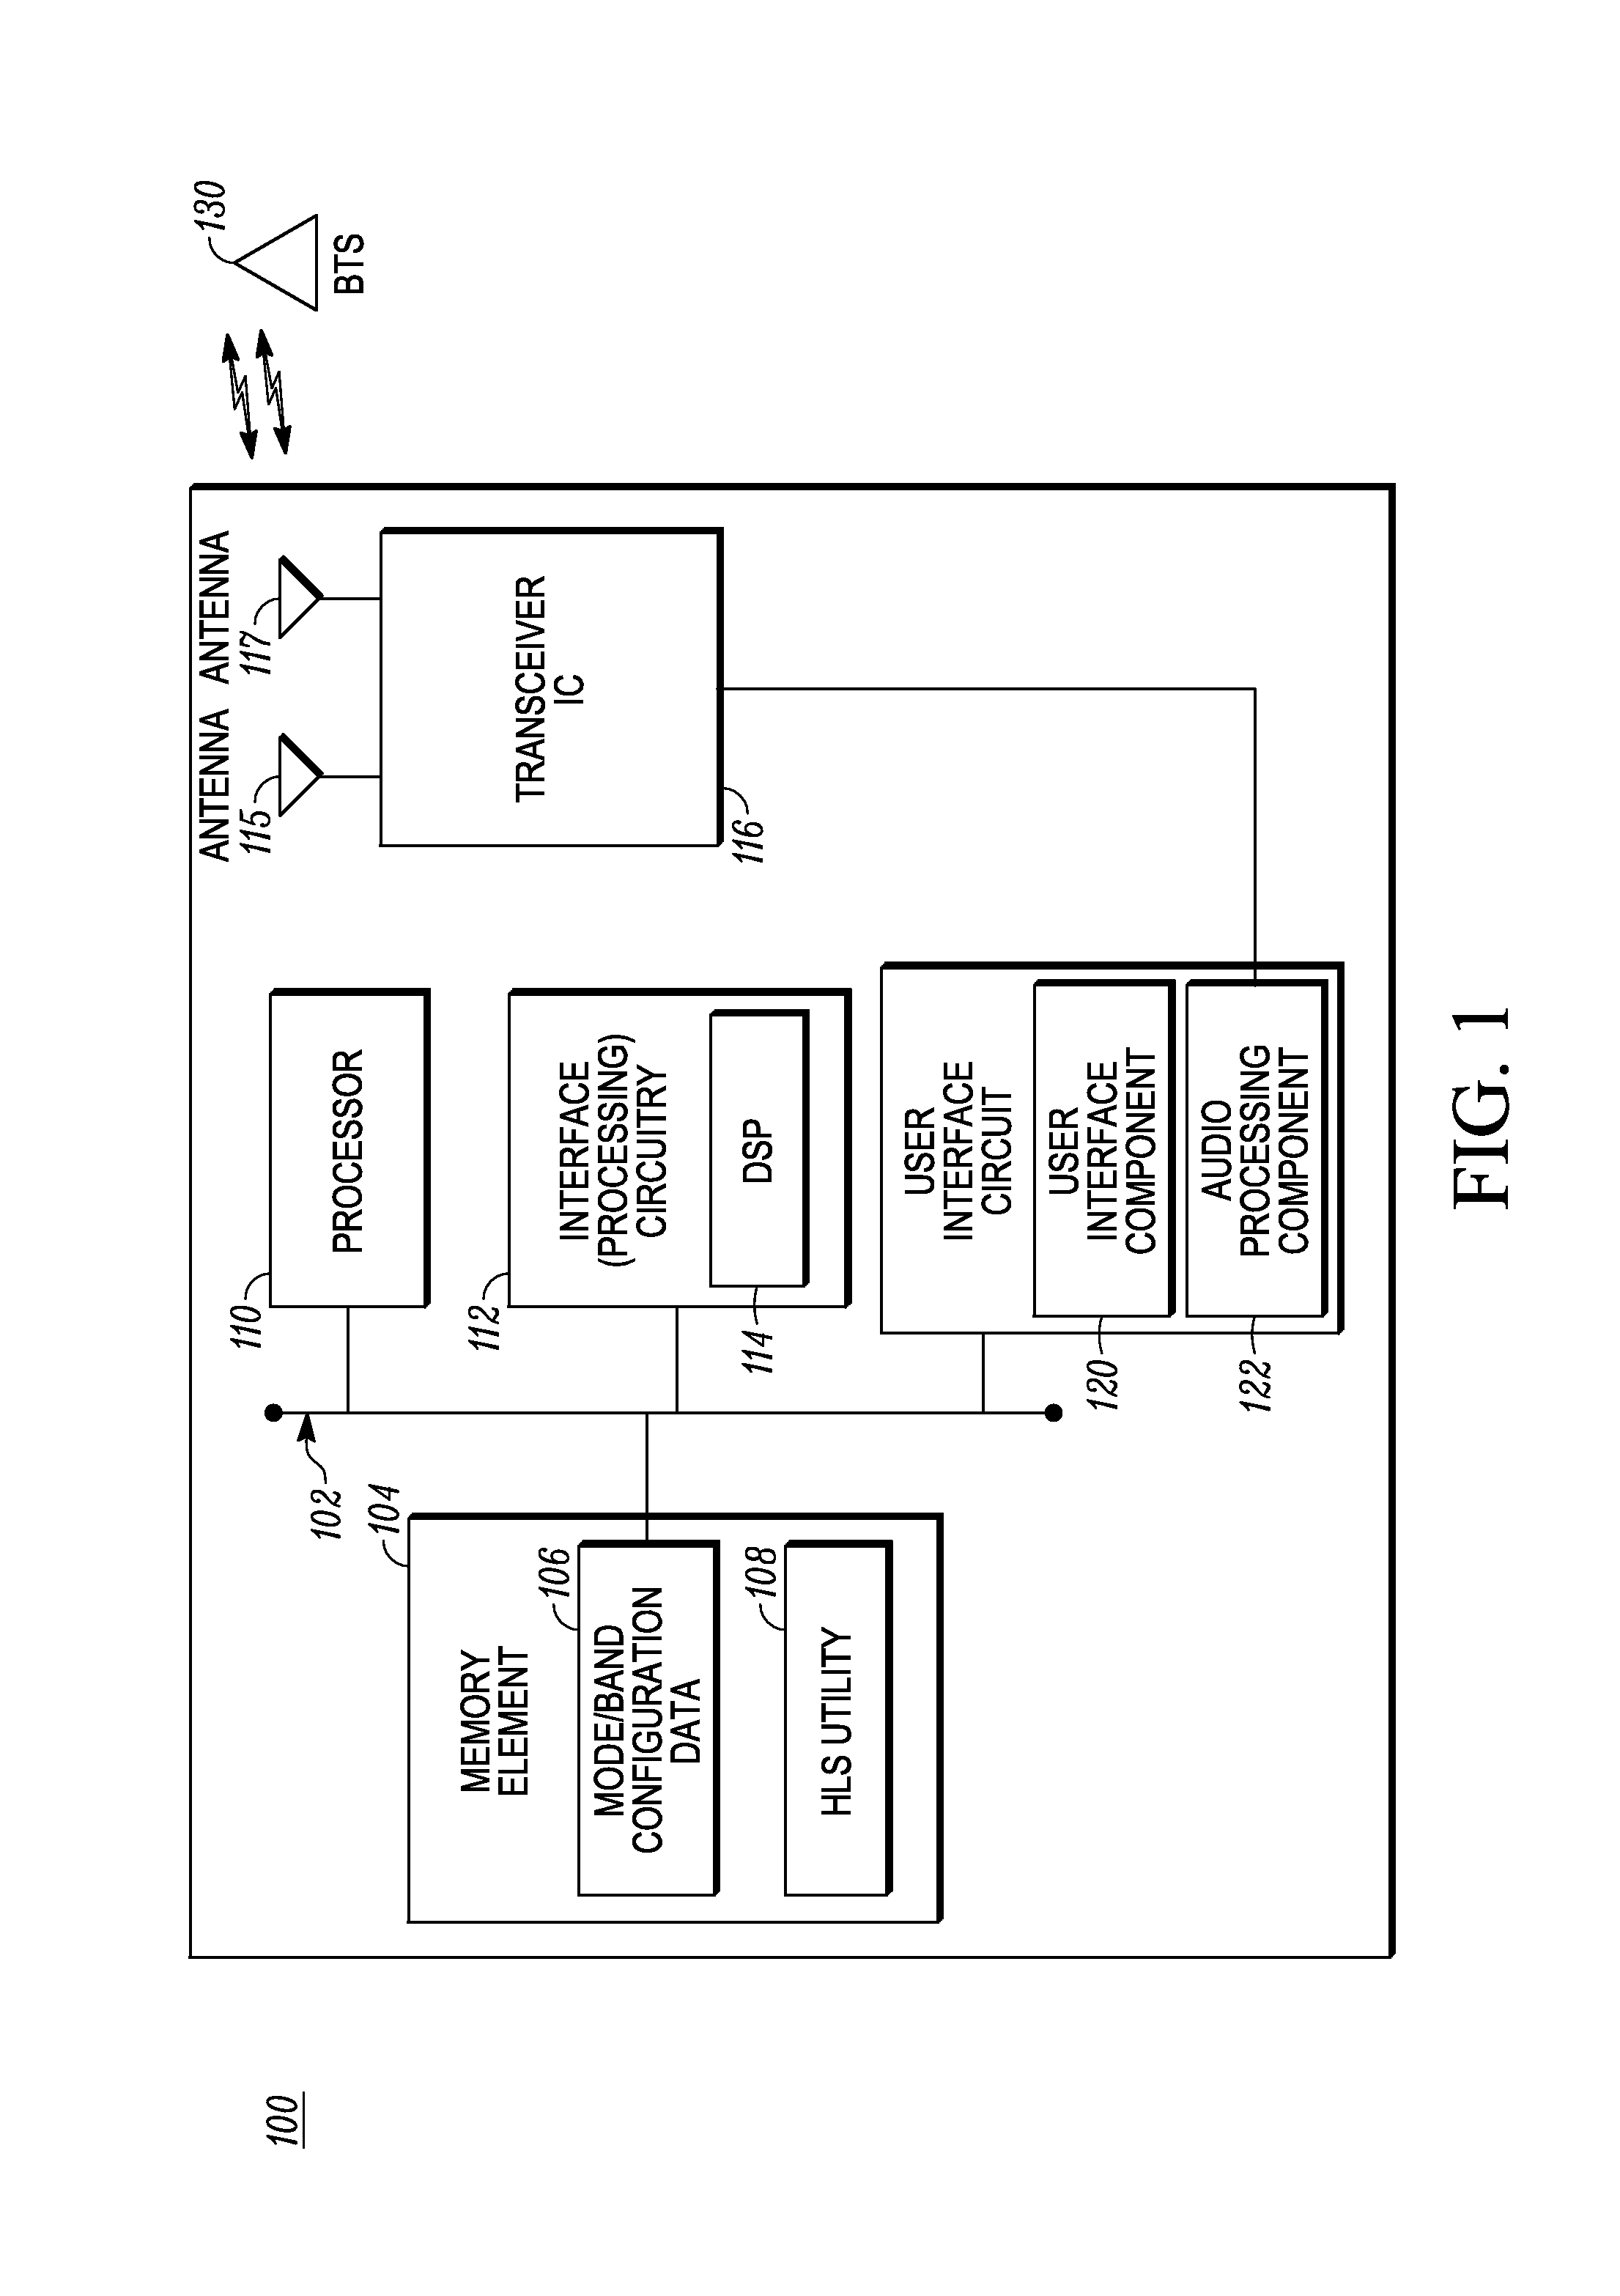 Front end employing pin diode switch with high linearity and low loss for simultaneous transmission